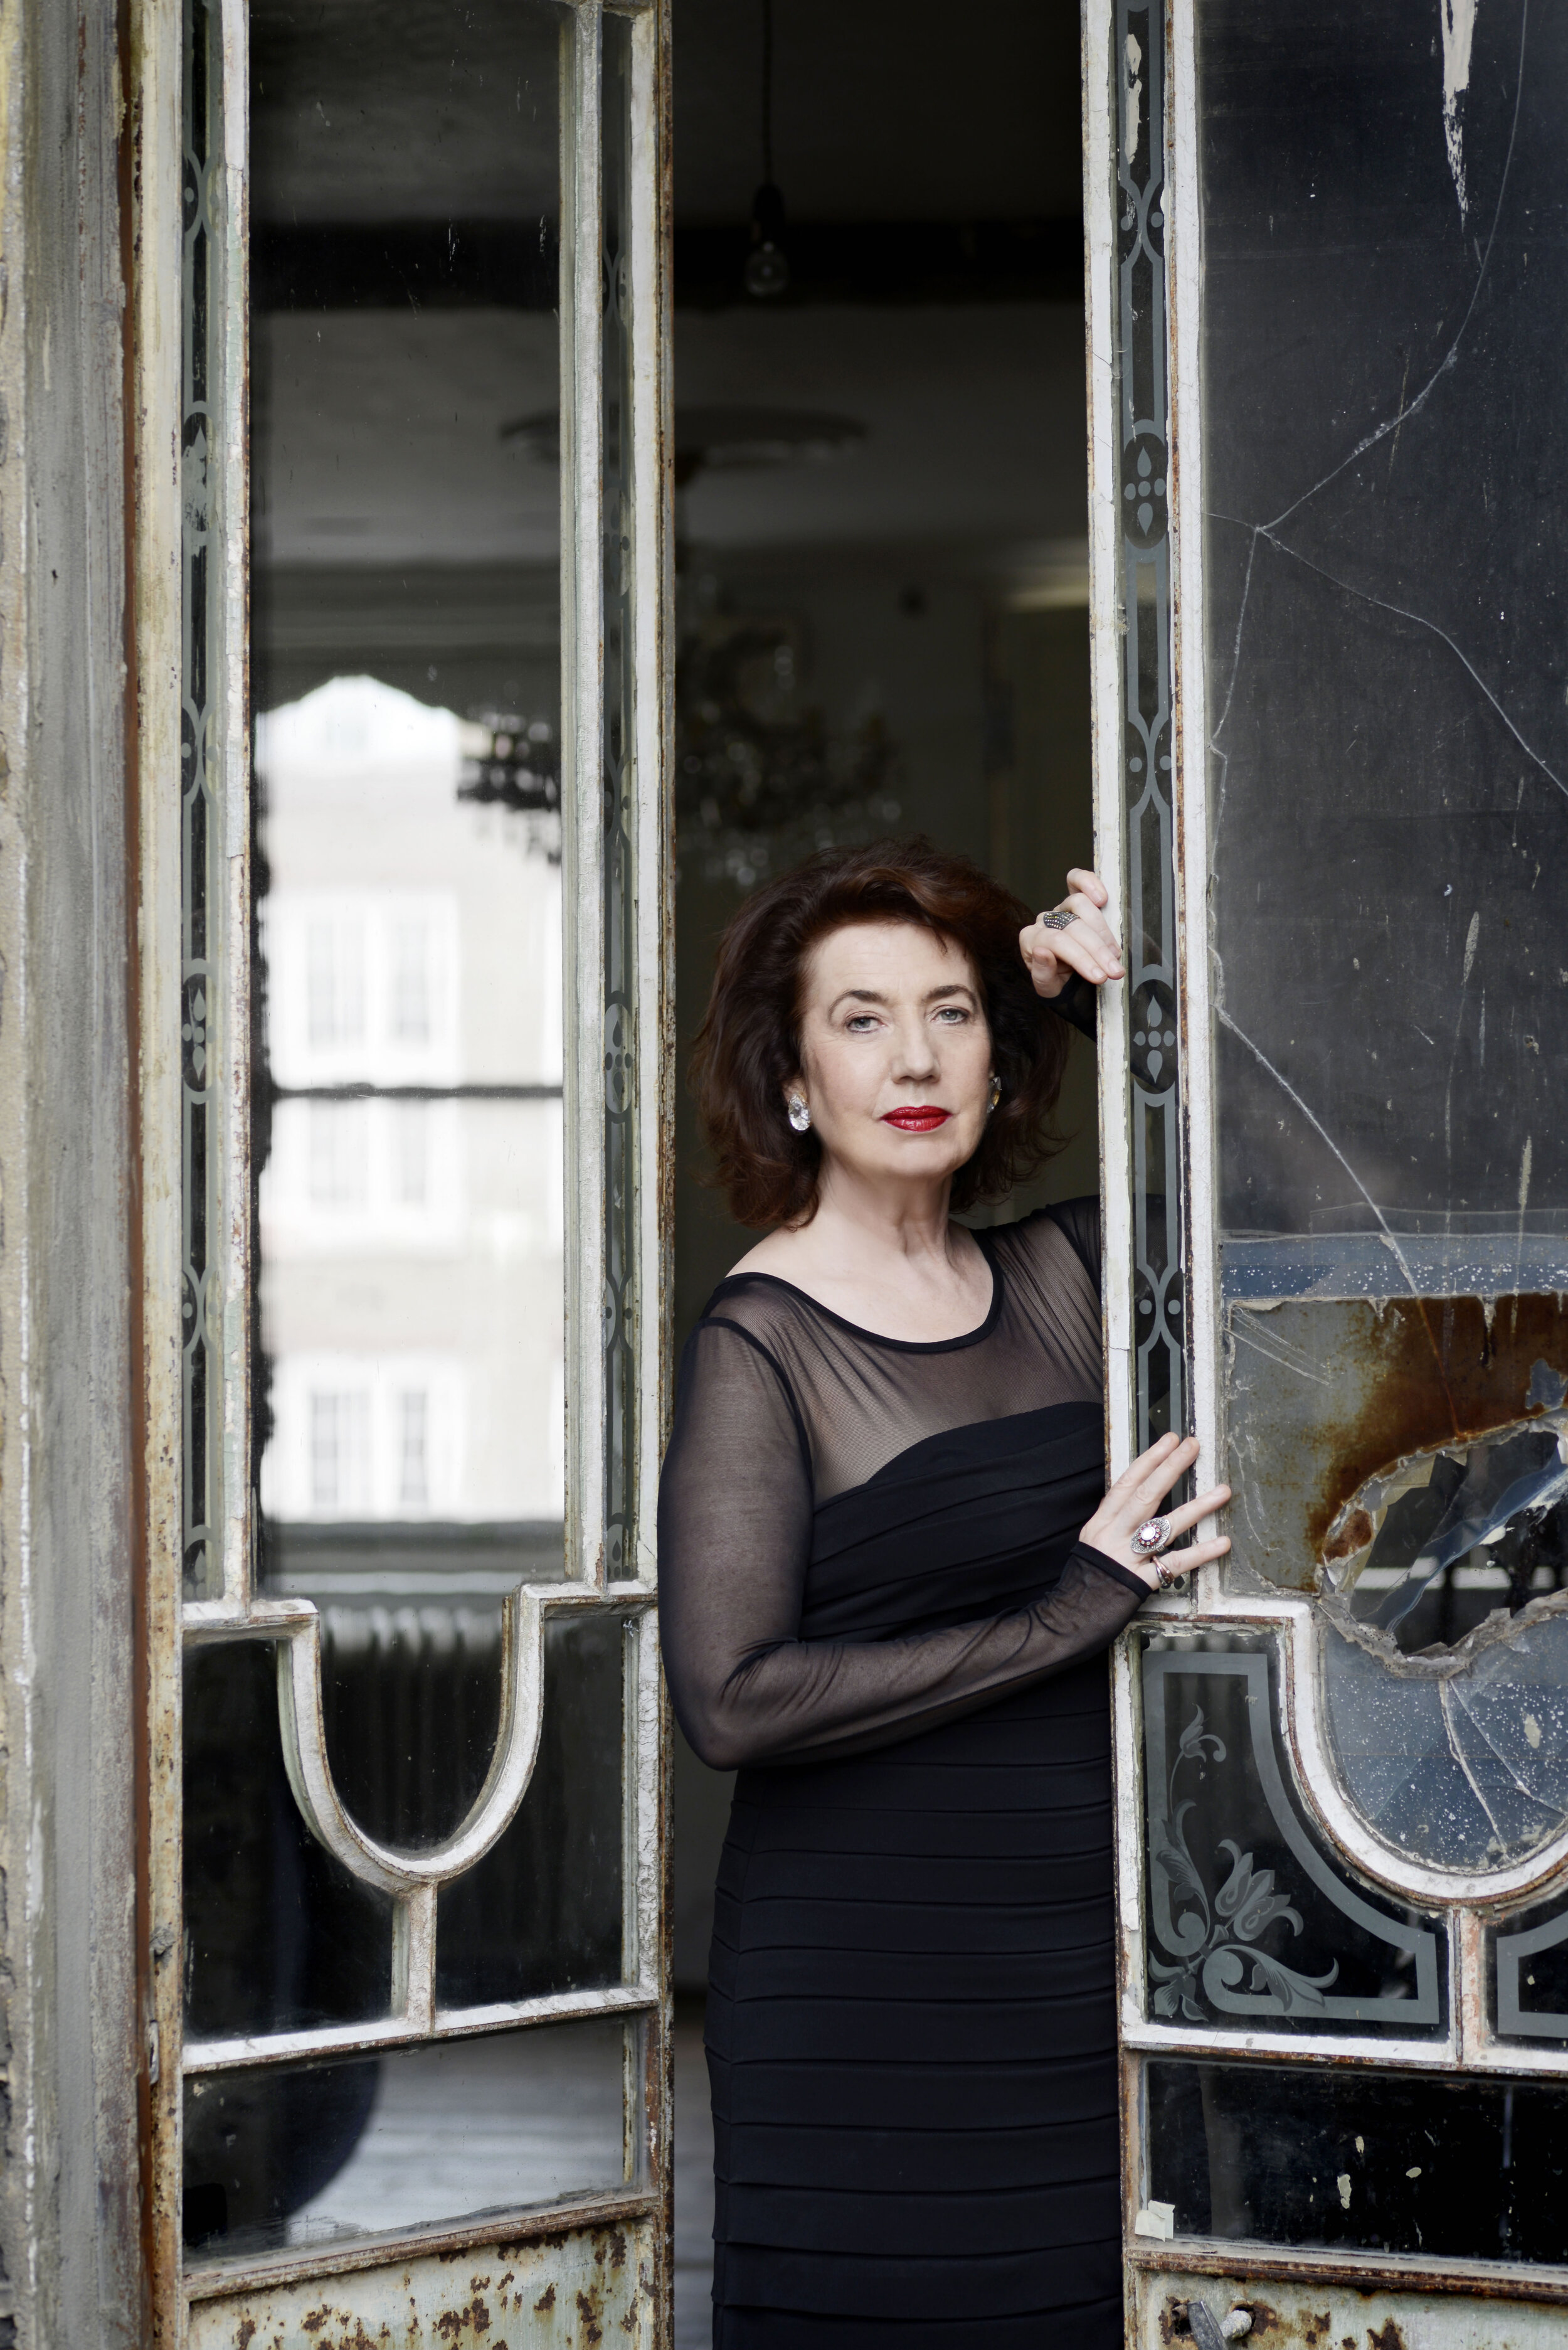  Imogen Cooper in formal attire with a calm, thoughtful face, standing in the opening of an antique double glass door (missing some glass) of an abandoned building, lightly leaning on one door.